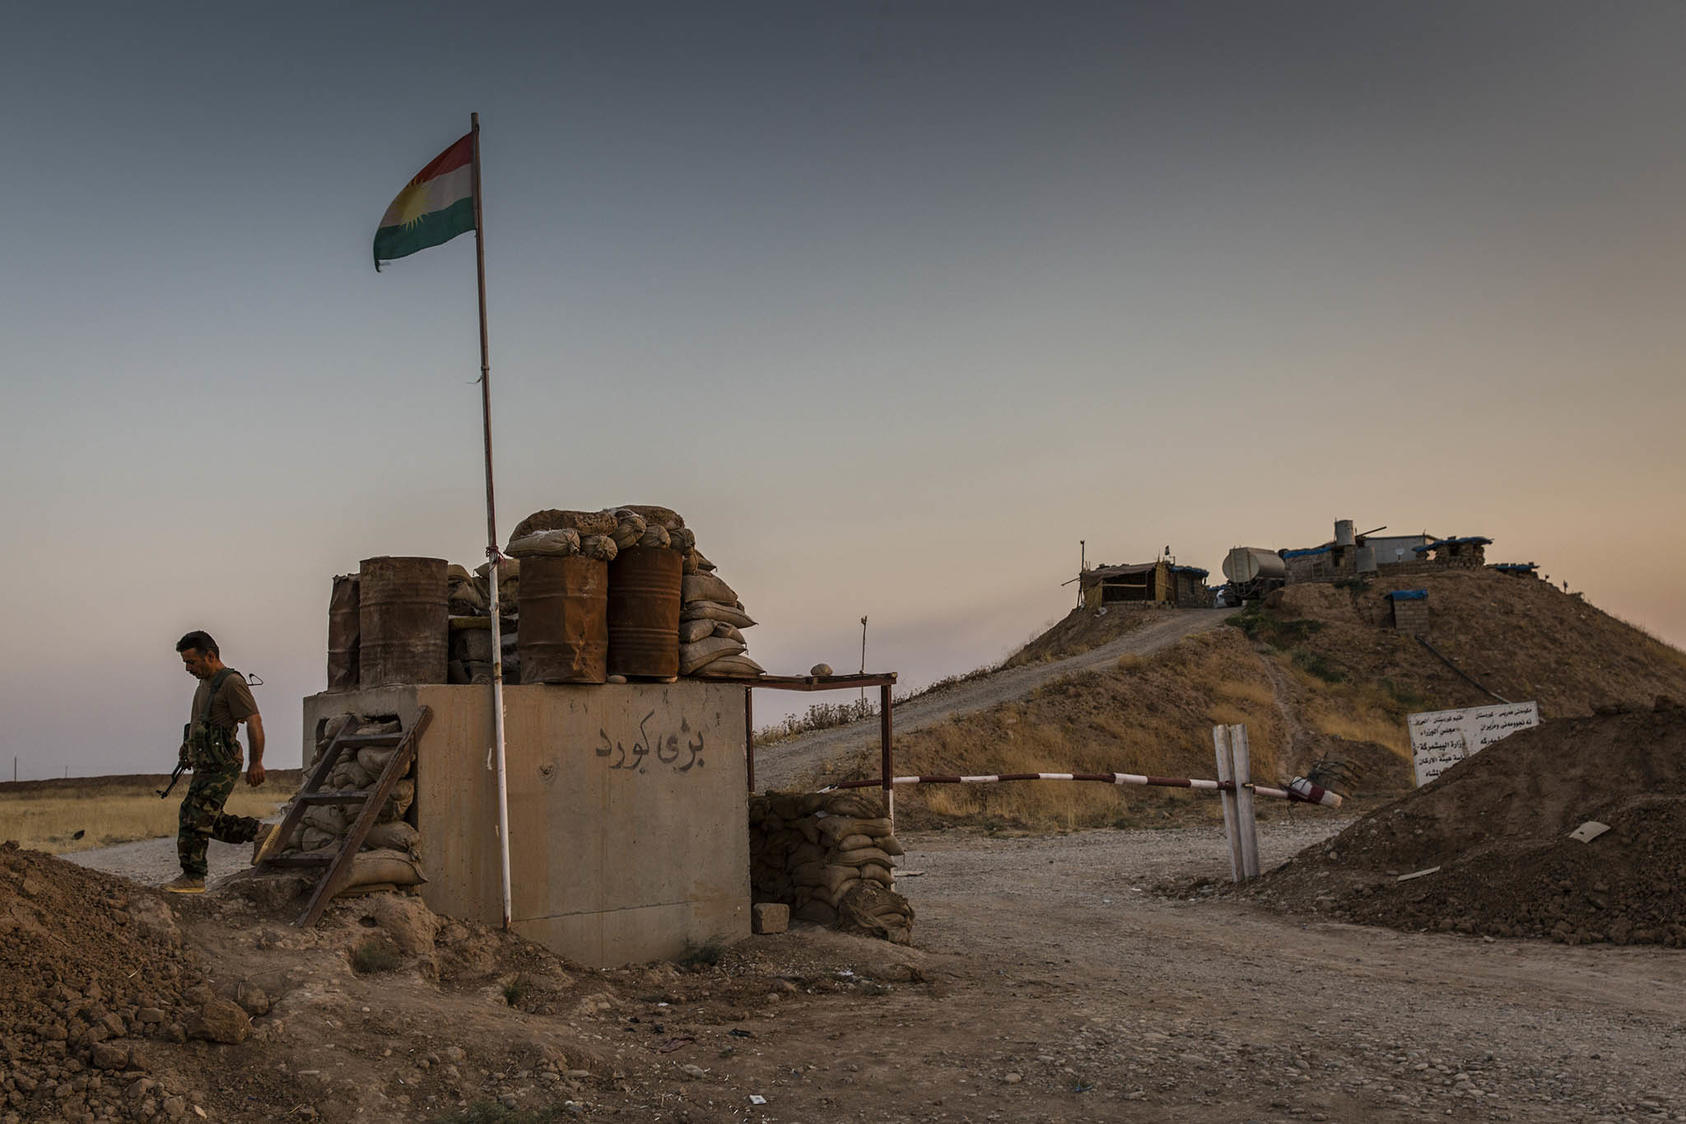 A Kurdish peshmerga fighter guards a base near territory held by ISIS, near Hawiga, Iraq, Aug. 27, 2017. A top Kurdish official told a USIP audience that ISIS’ extremist ideology still poses a threat. (Ivor Prickett/The New York Times)